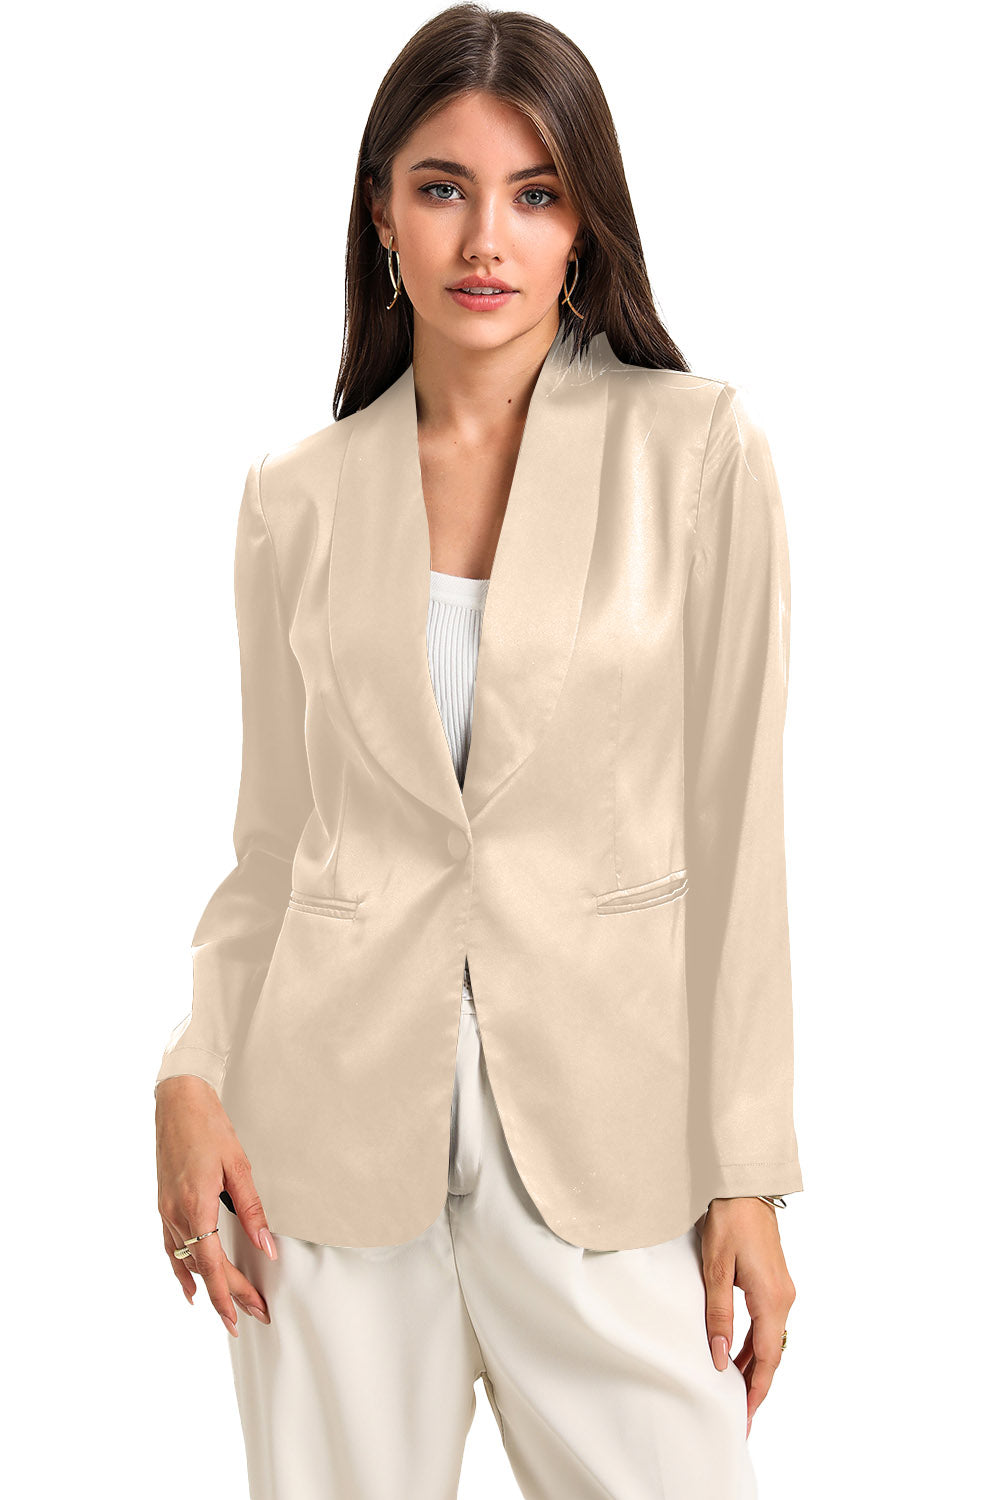 Collared Neck Single Breasted Blazer with Pockets